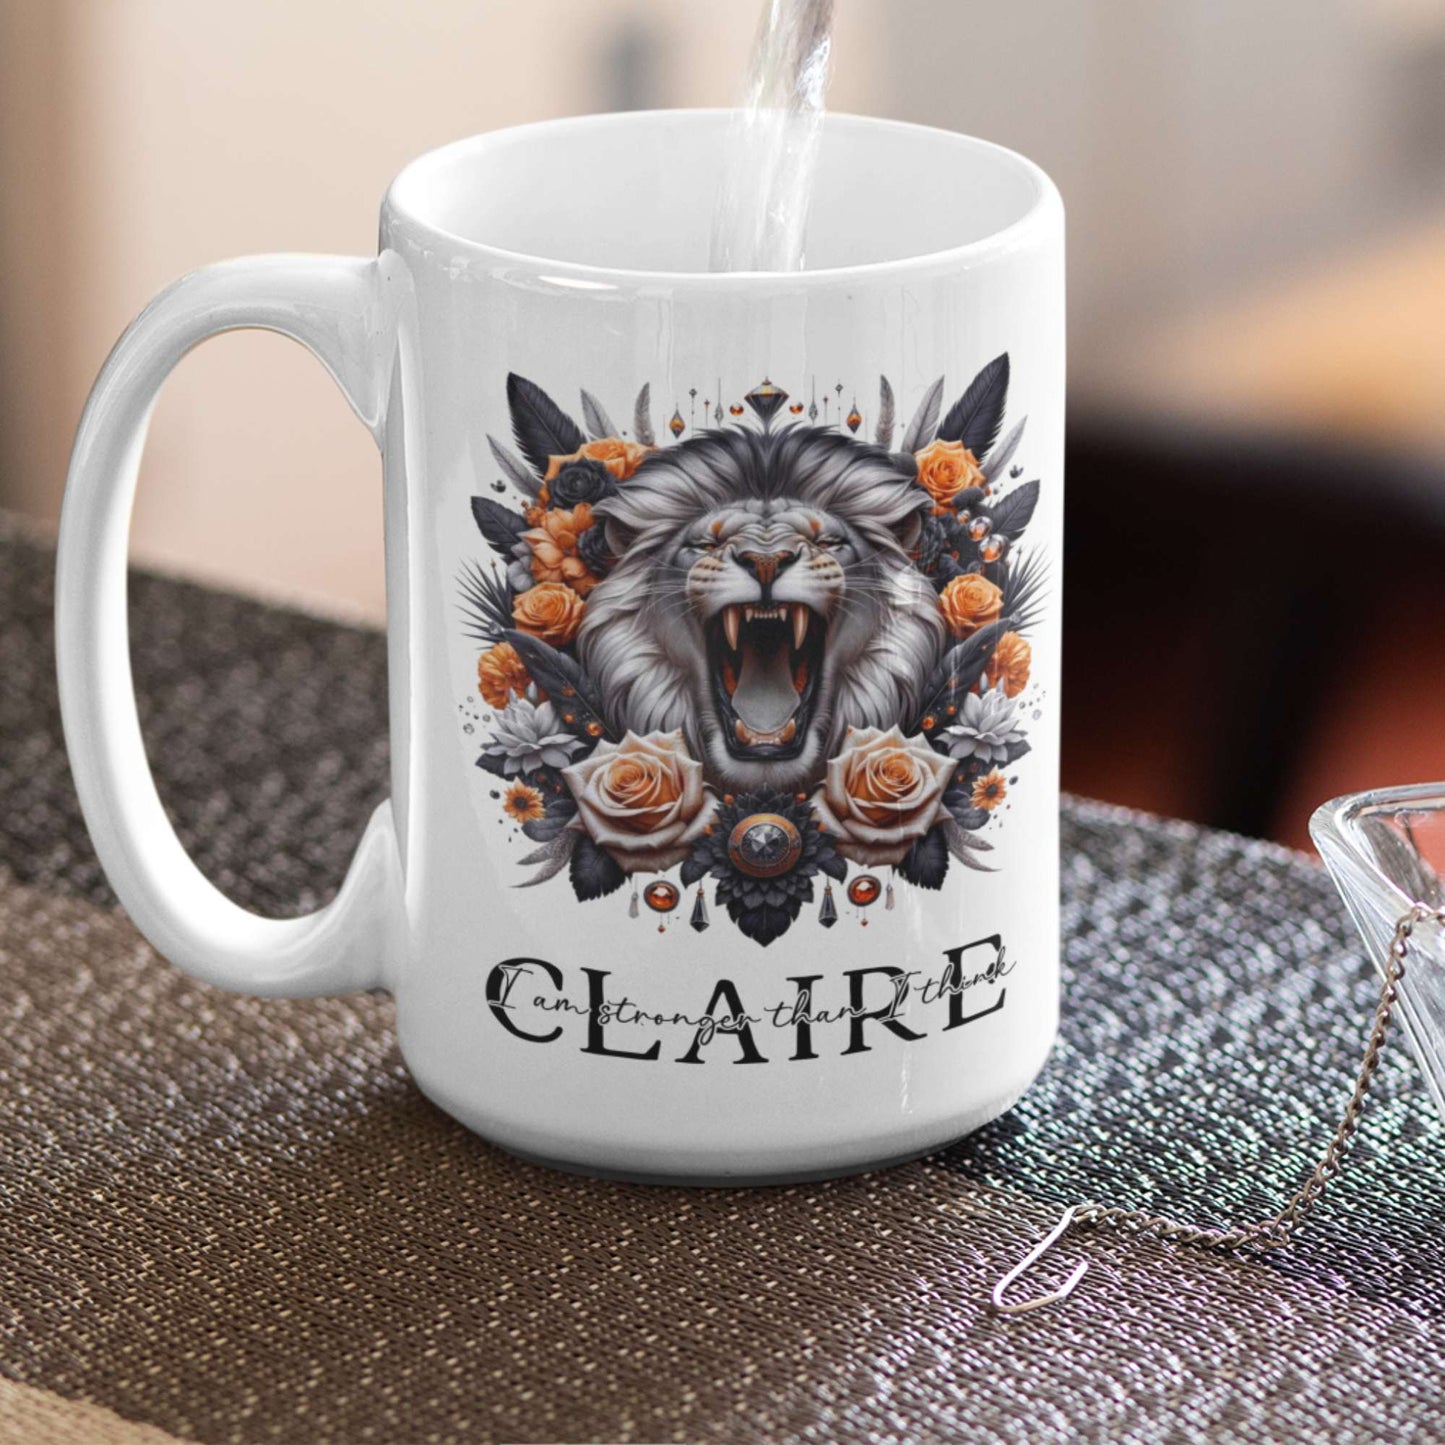 Personalised Roaring Lion Mugs & Tumblers: 11oz Black Inner, 15oz White, 20oz Insulated - Majestic Lion Drinkware for Coffee & Tea Lovers, Unique Gifts for All Occasions